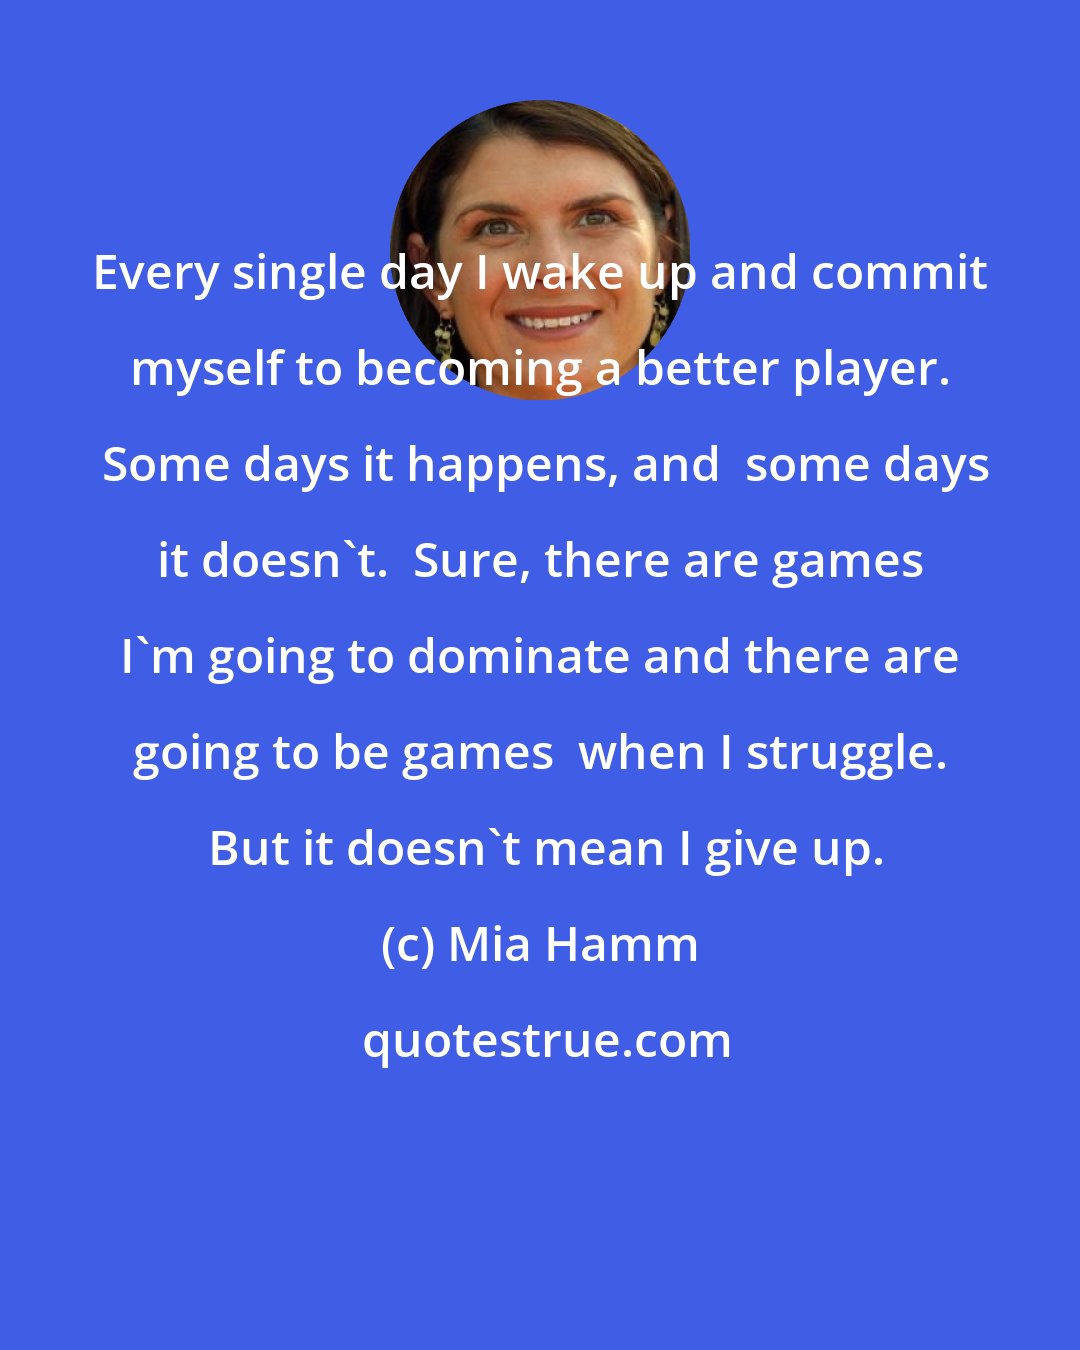 Mia Hamm: Every single day I wake up and commit myself to becoming a better player.  Some days it happens, and  some days it doesn't.  Sure, there are games I'm going to dominate and there are going to be games  when I struggle.  But it doesn't mean I give up.